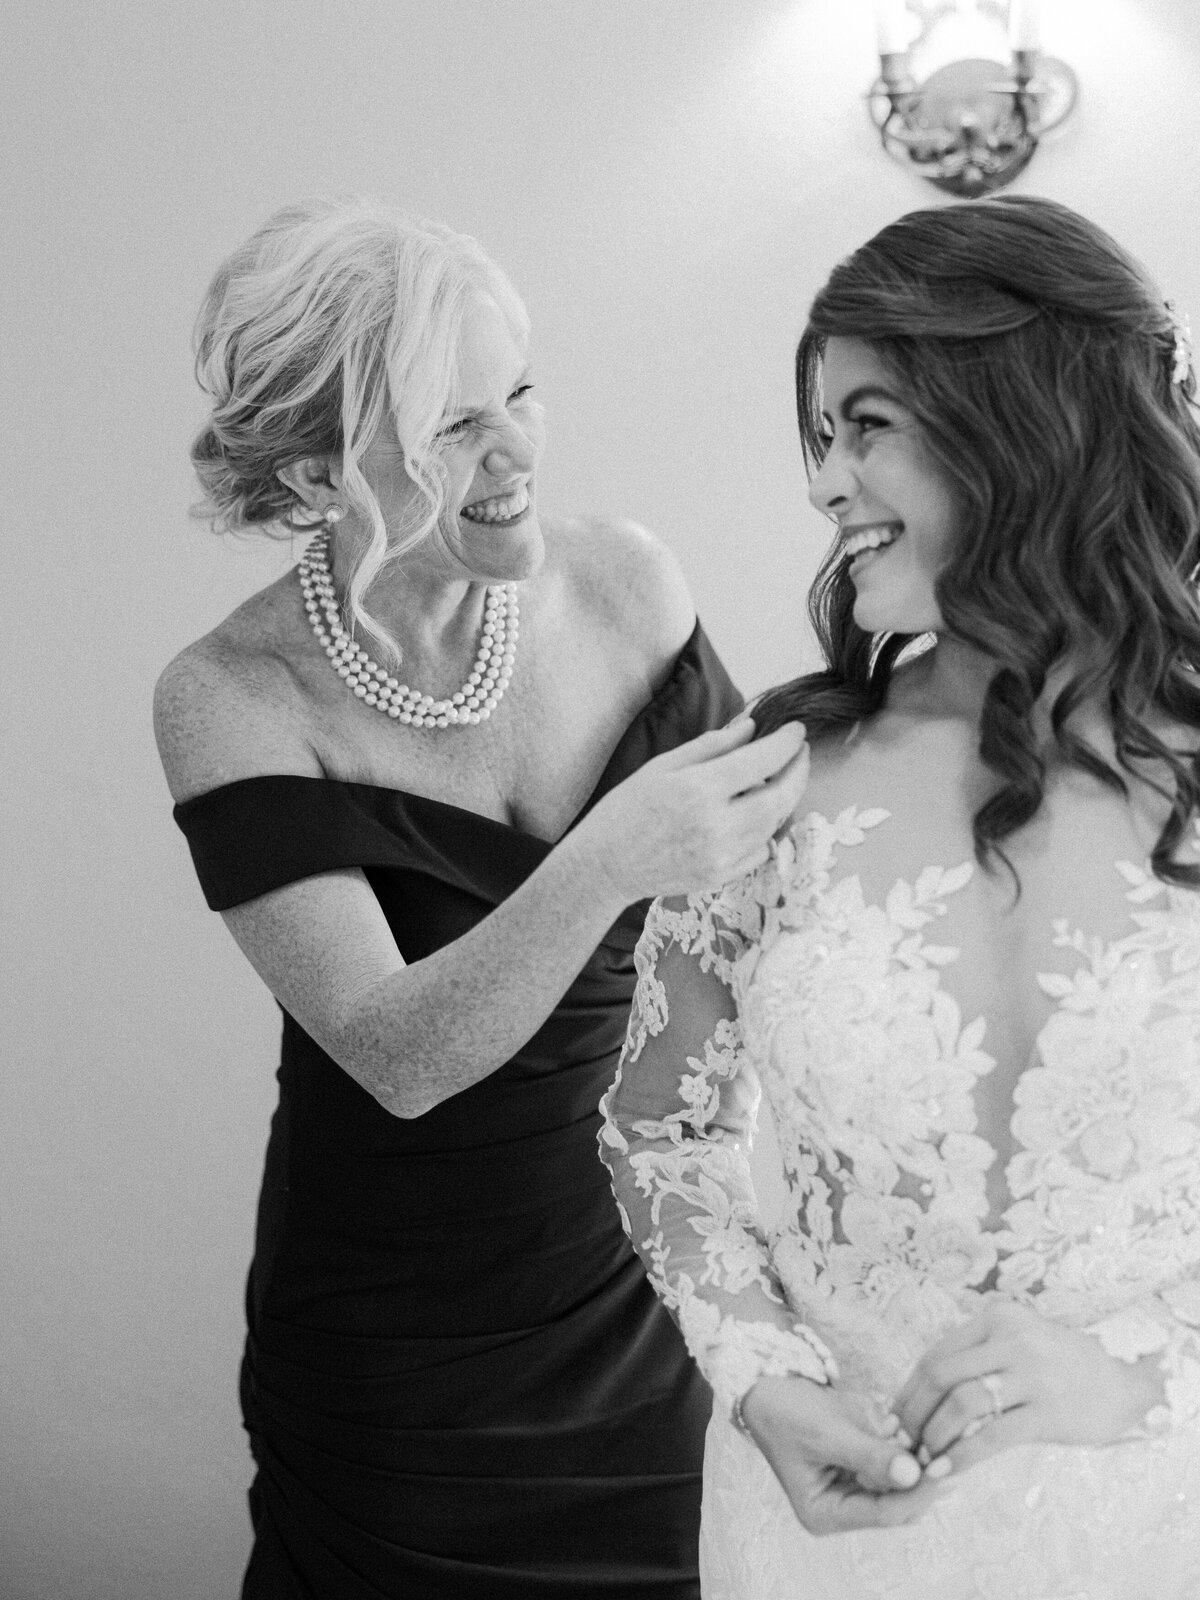 A touching moment between a bride and her mom as her mom helps to get the bride into her wedding dress